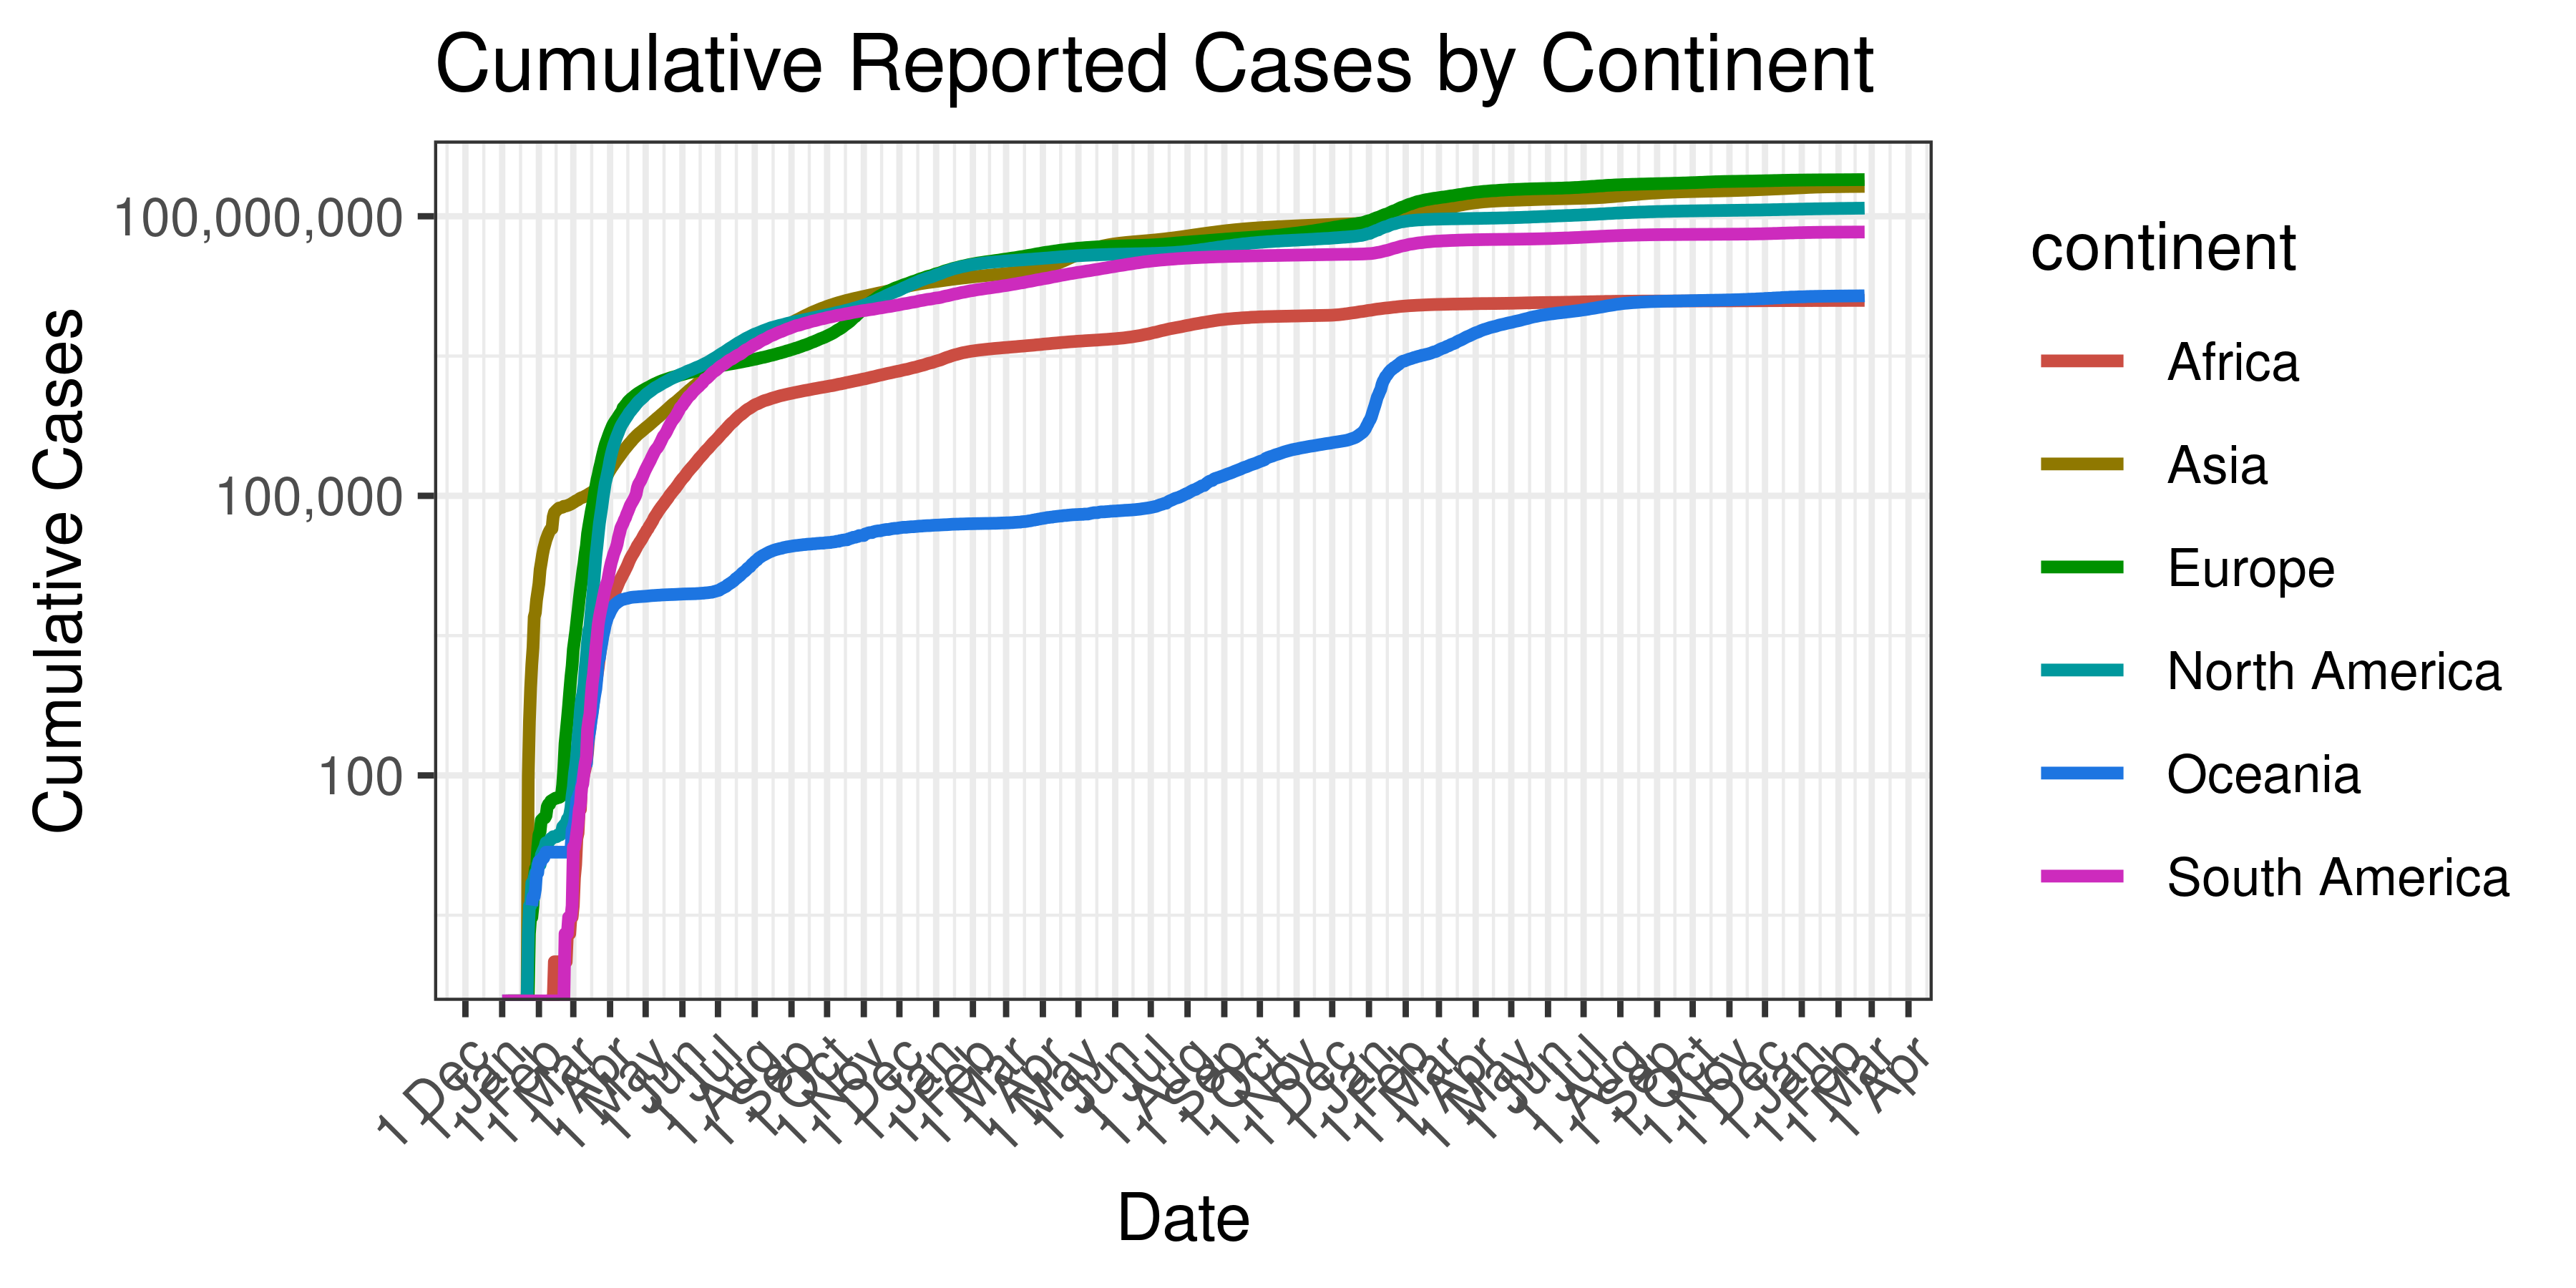 Cumulative Reported Cases by Continent